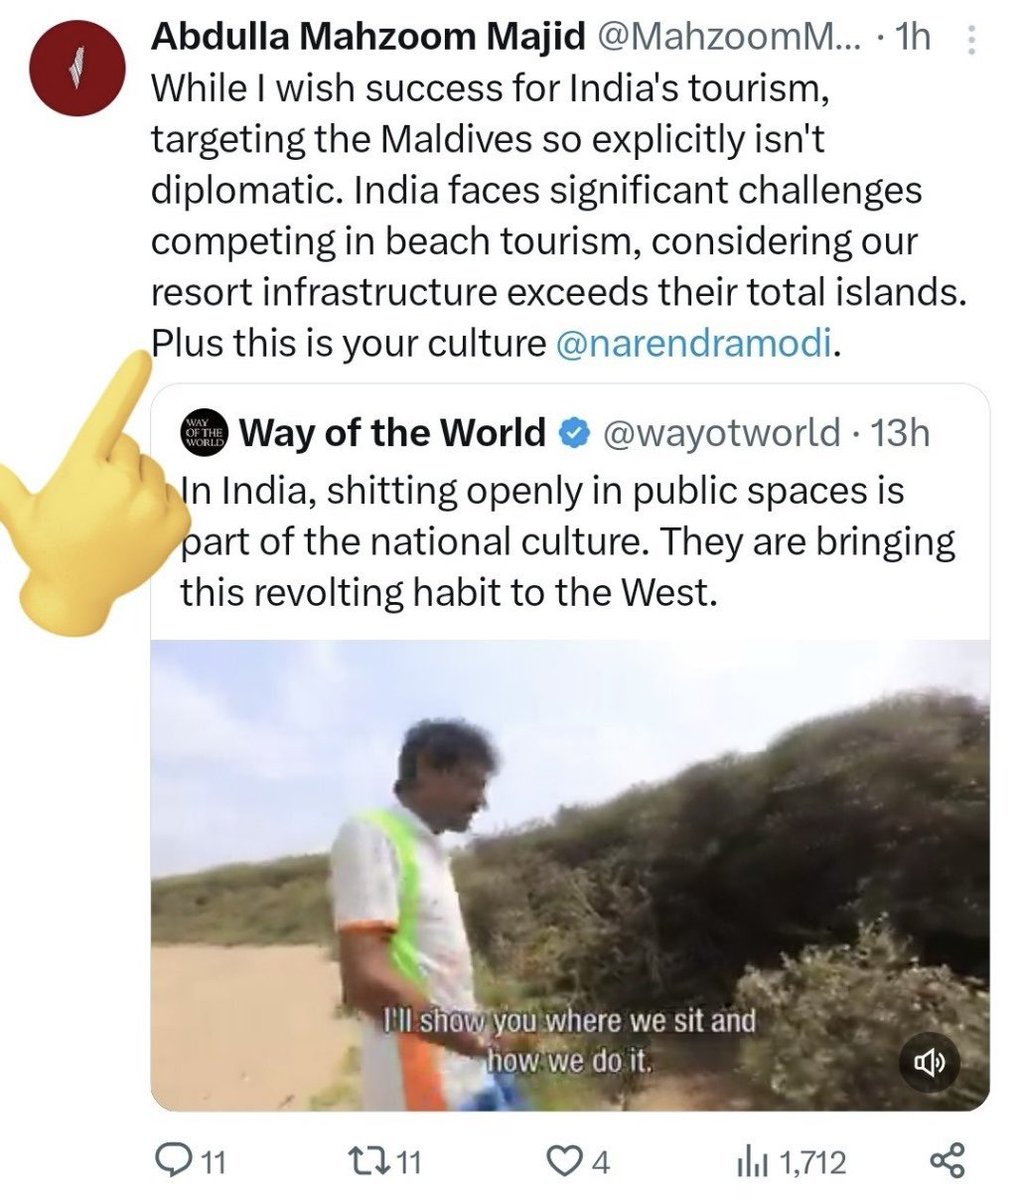 Came across comments from prominent public figures from Maldives passing hateful and racist comments on Indians. Surprised that they are doing this to a country that sends them the maximum number of tourists. We are good to our neighbors but why should we tolerate such